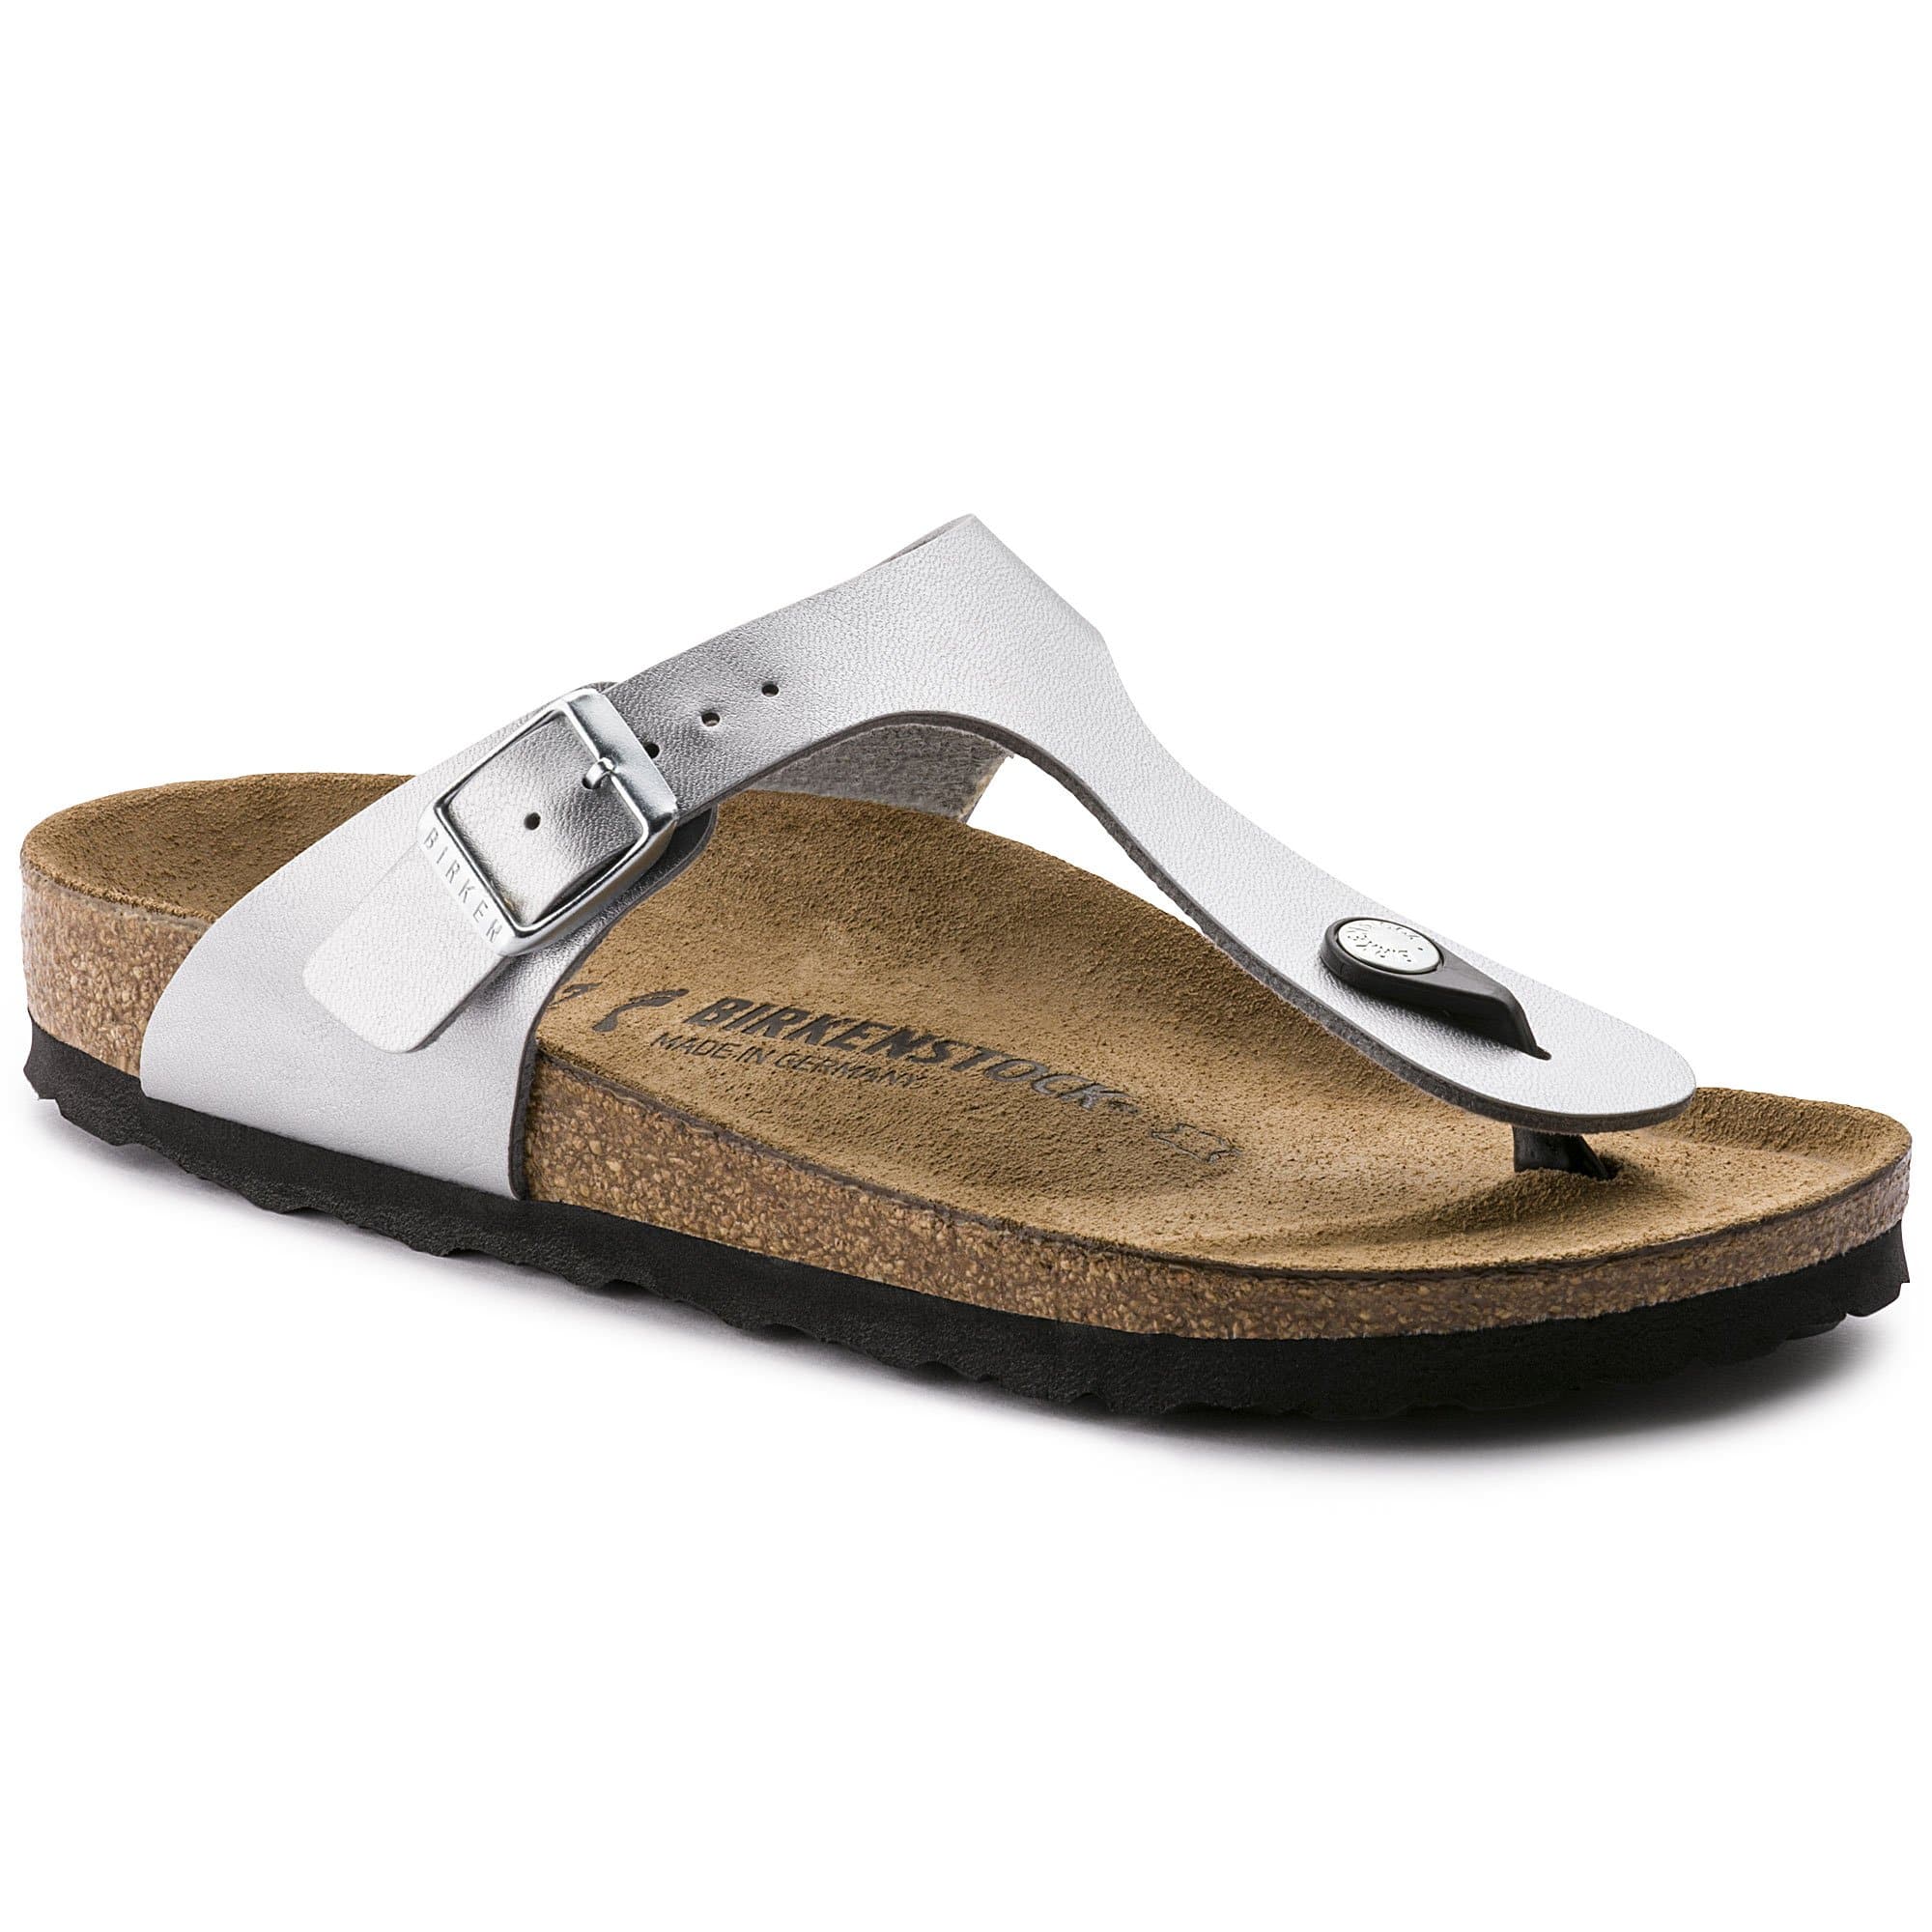 2021 Lowest Price] Paragon Mens Thong Sandal Price in India & Specifications